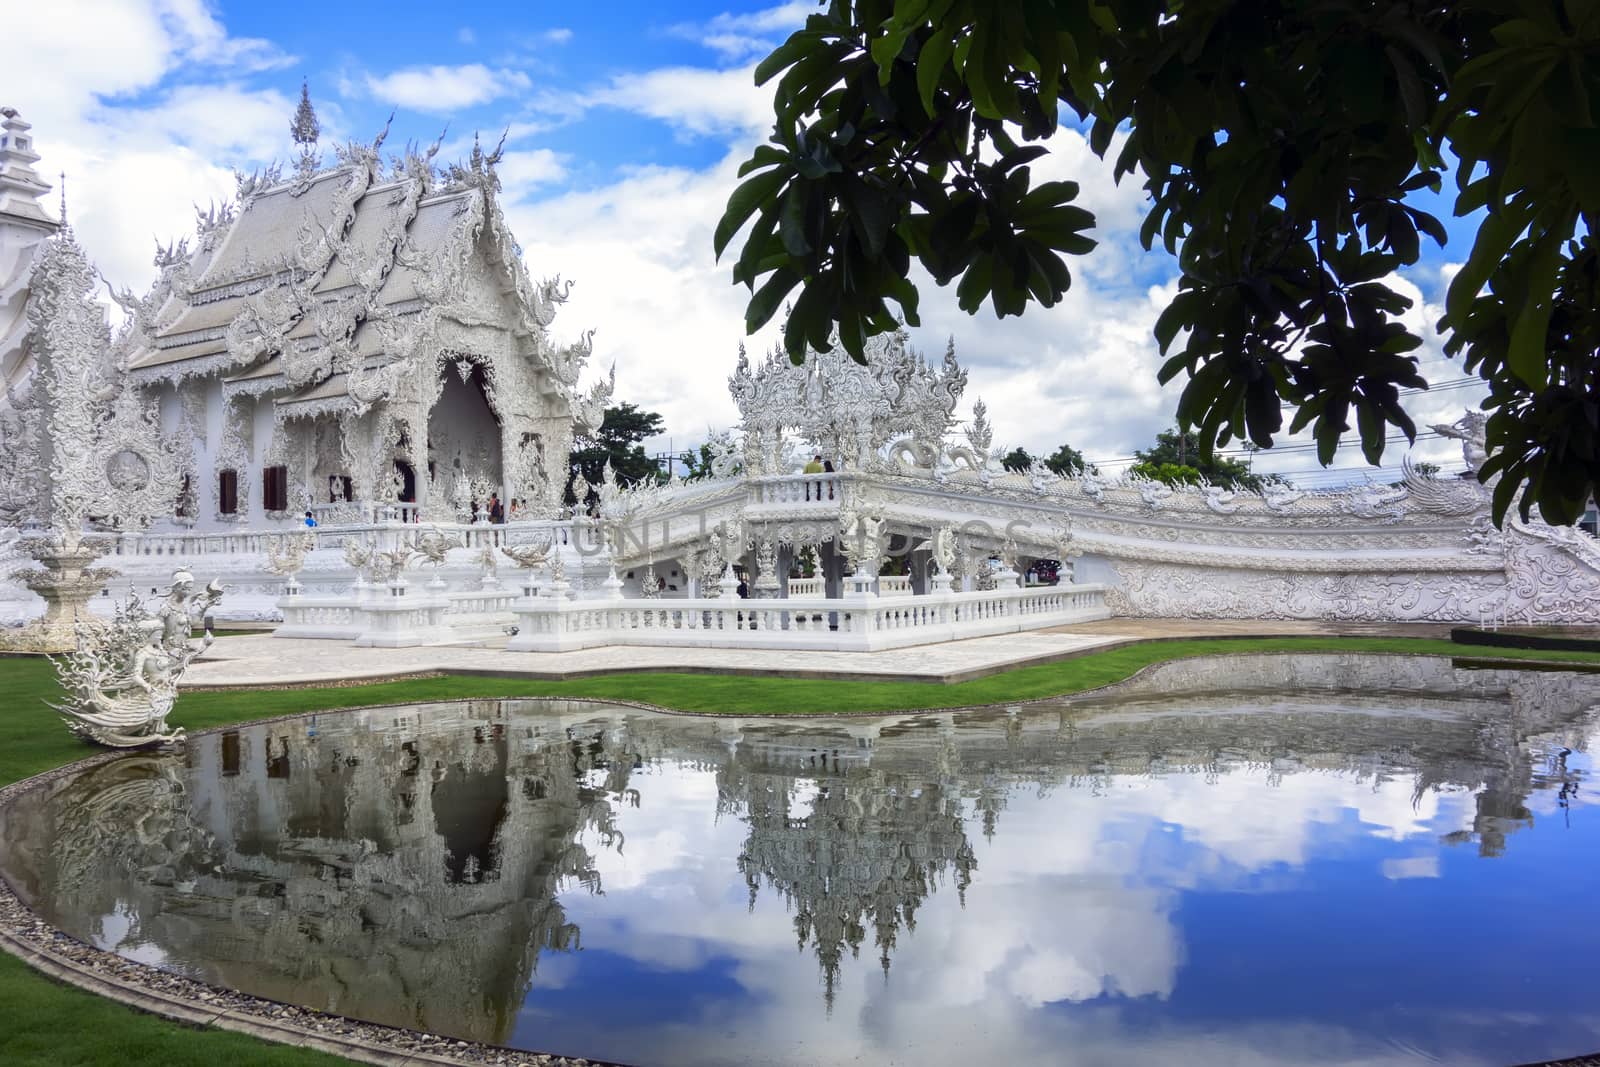 At White Temple, is a contemporary unconventional Buddhist temple in Chiang Rai, Thailand.